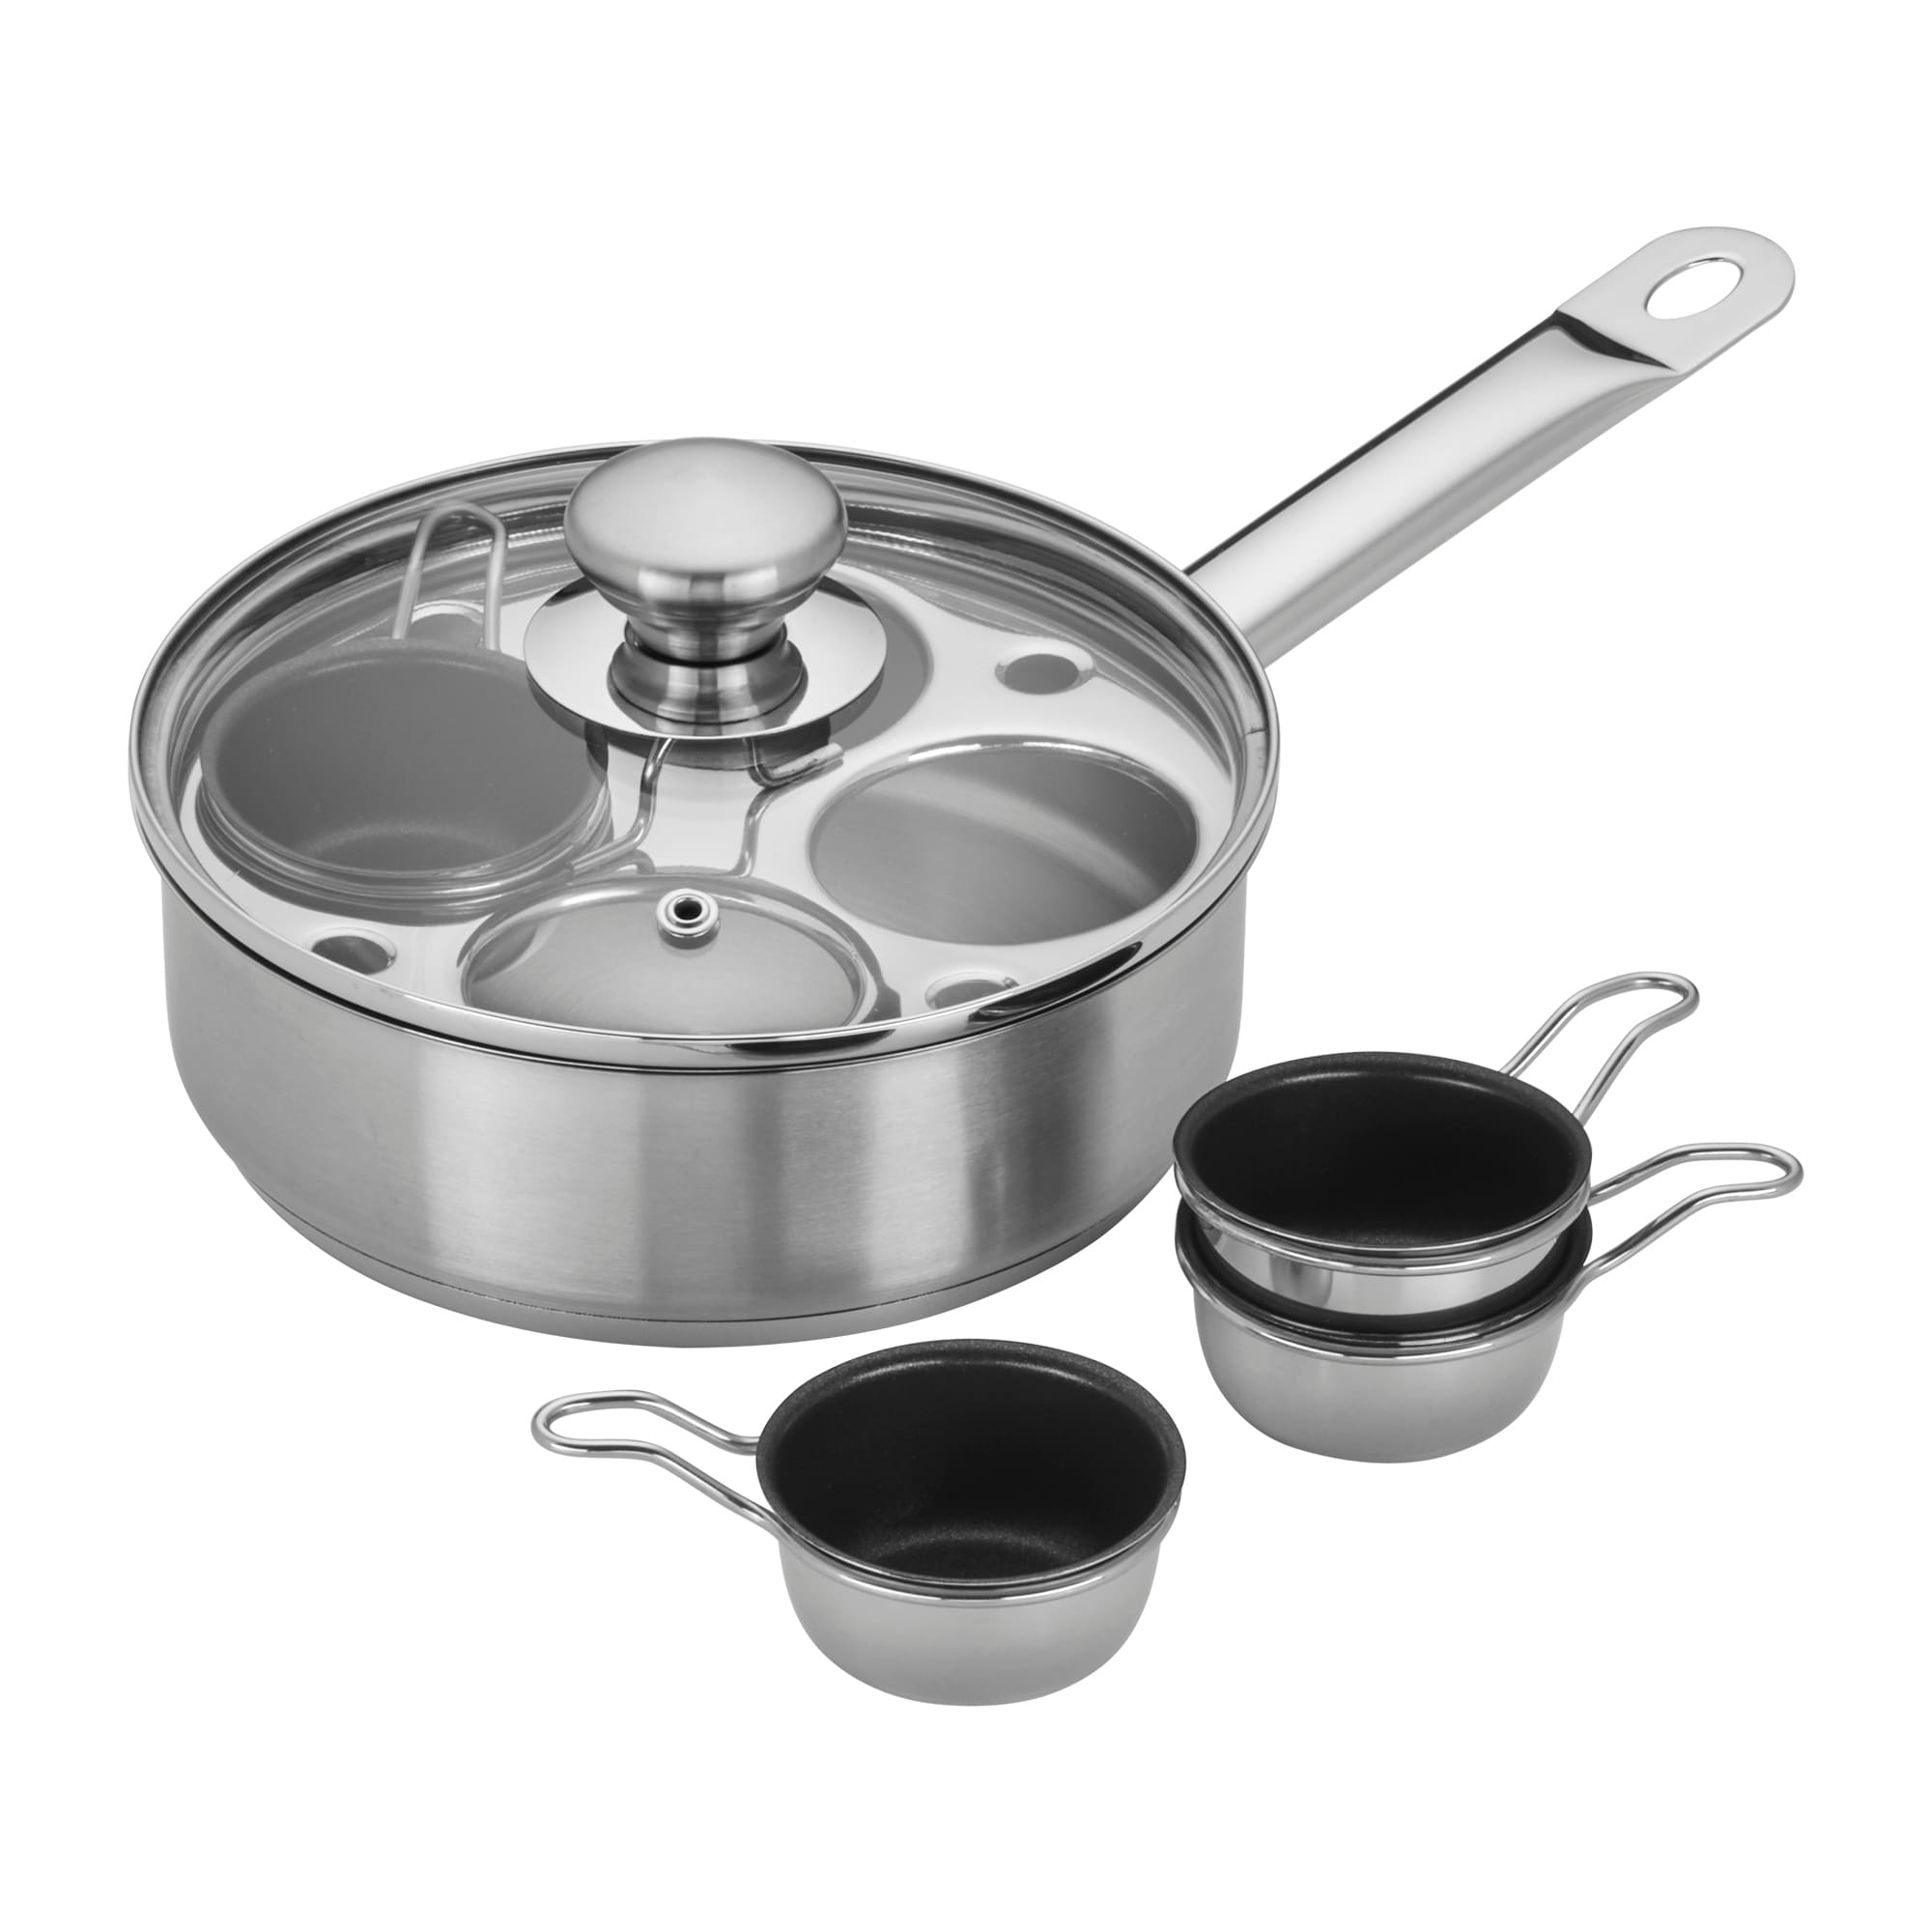 https://ak1.ostkcdn.com/images/products/is/images/direct/8082b54e002fd11e7fd795cf51bc6a9bfb64b0c3/Demeyere-Resto-4-cup-Stainless-Steel-Egg-Poacher-Set.jpg